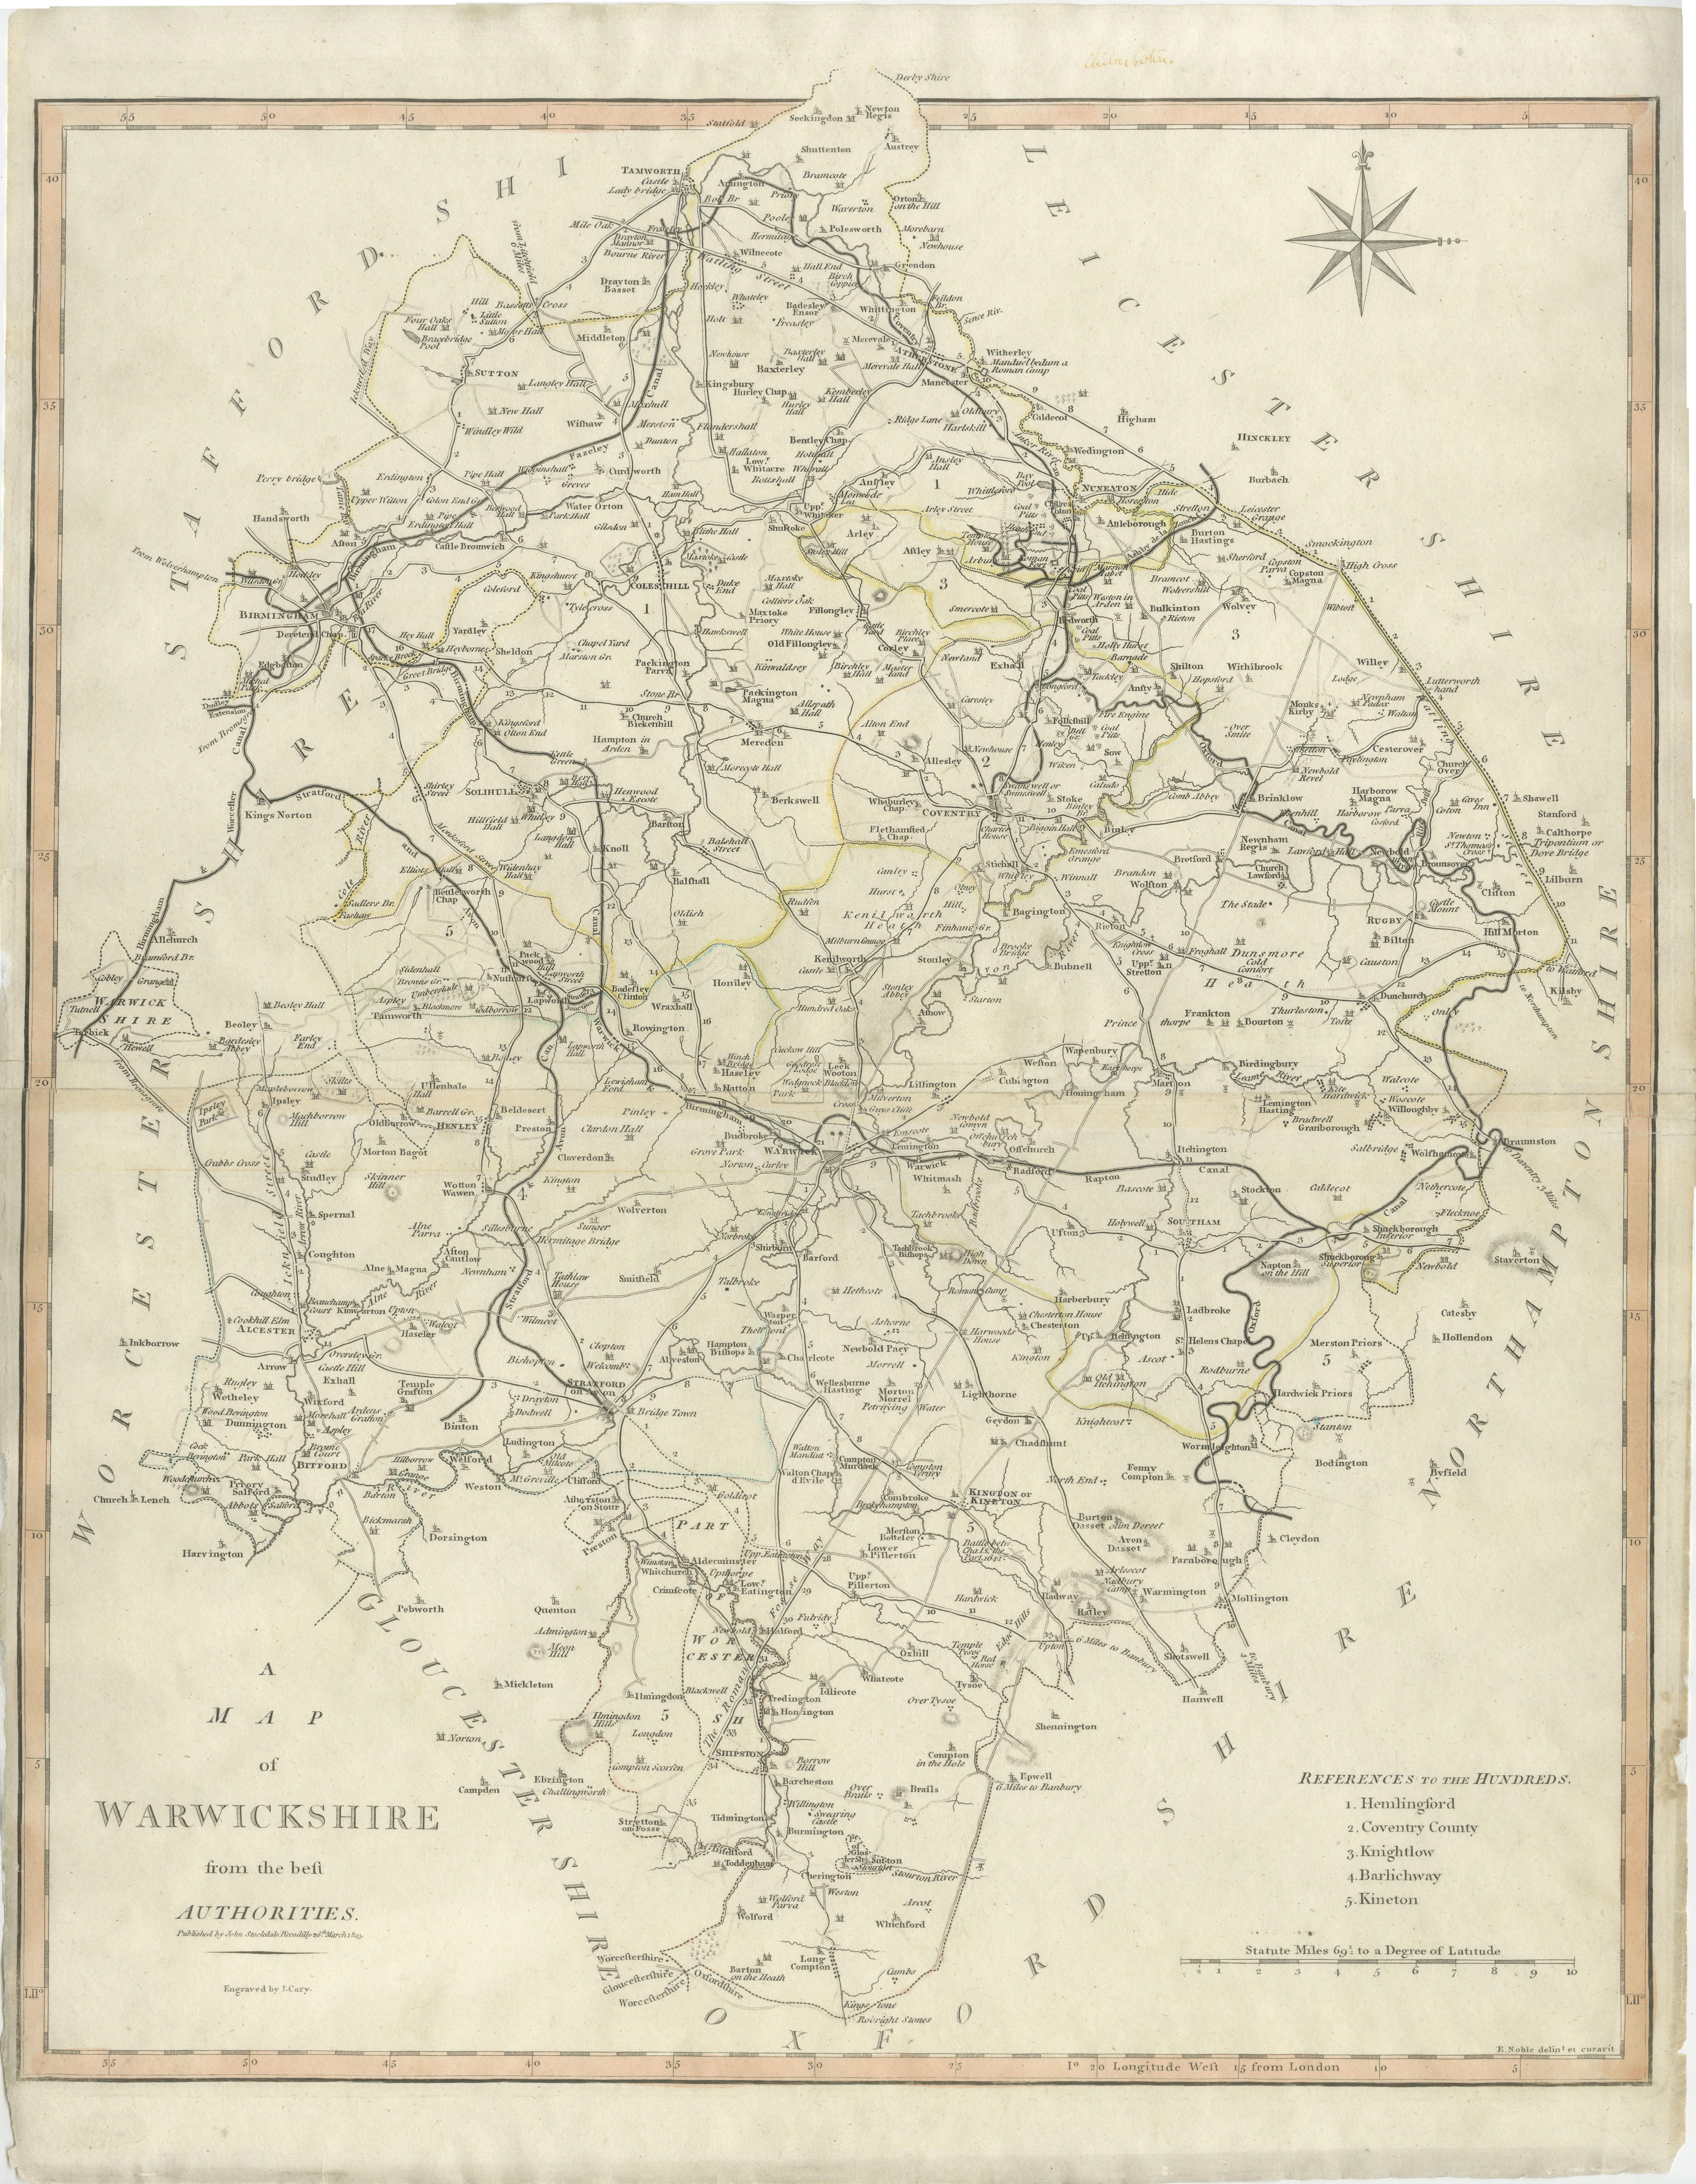 Antique map titled 'A Map of Warwickshire from the best Authorities'. Original old county map of Warwickshire, England. Engraved by John Cary. Originates from 'New British Atlas' by John Stockdale, published 1805. 

John Cary (1755-1835) was a